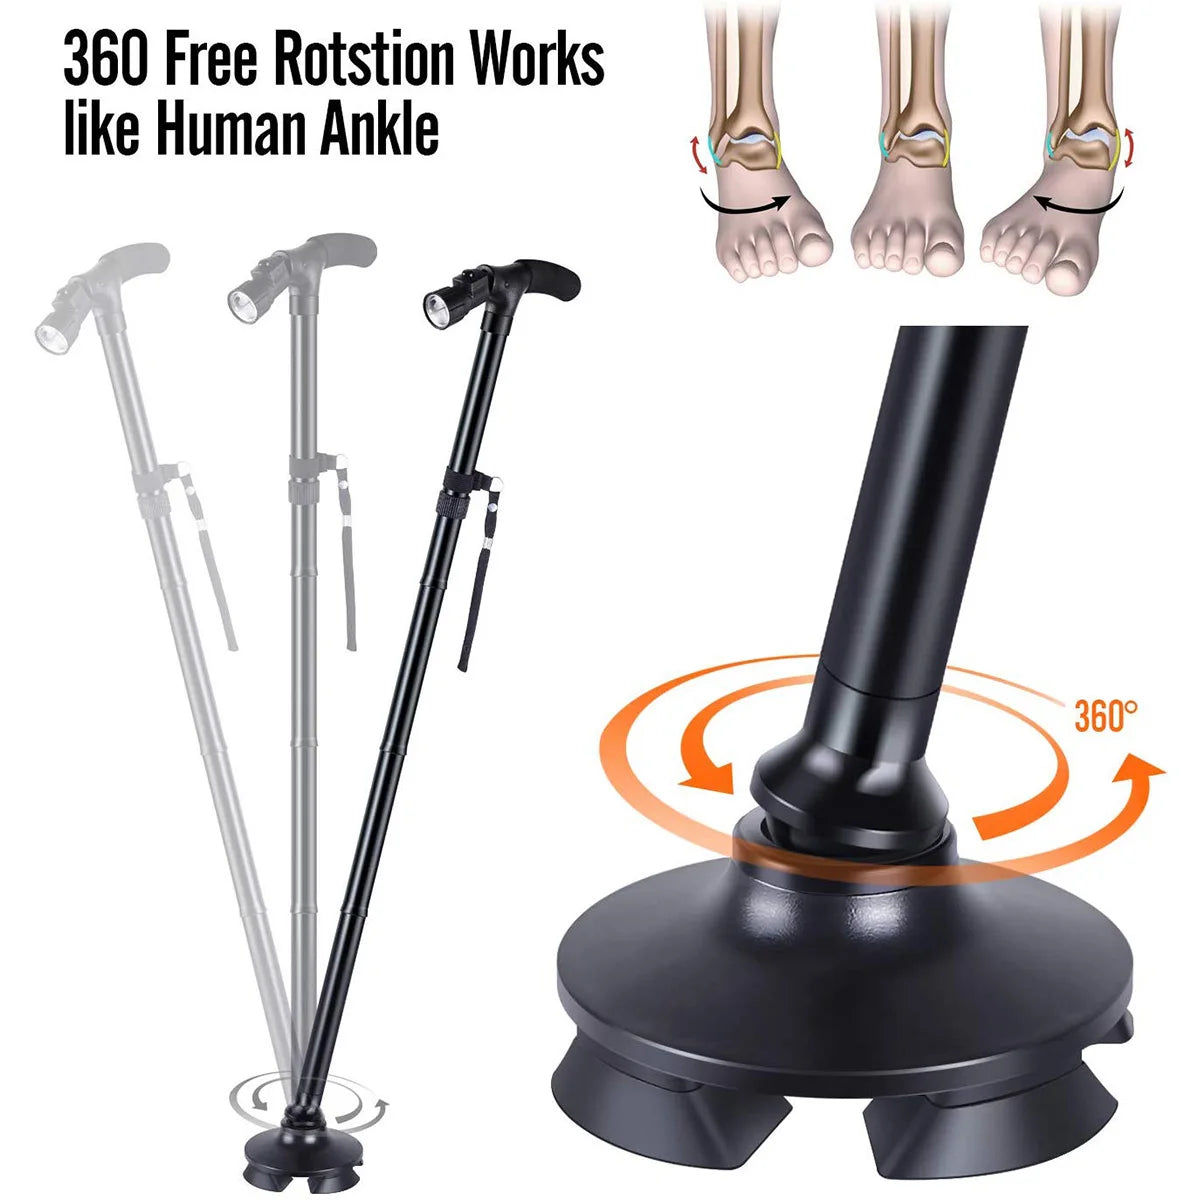 Folding Anti-slip Aluminum Cane with LED Light - Aids For Healthy Living